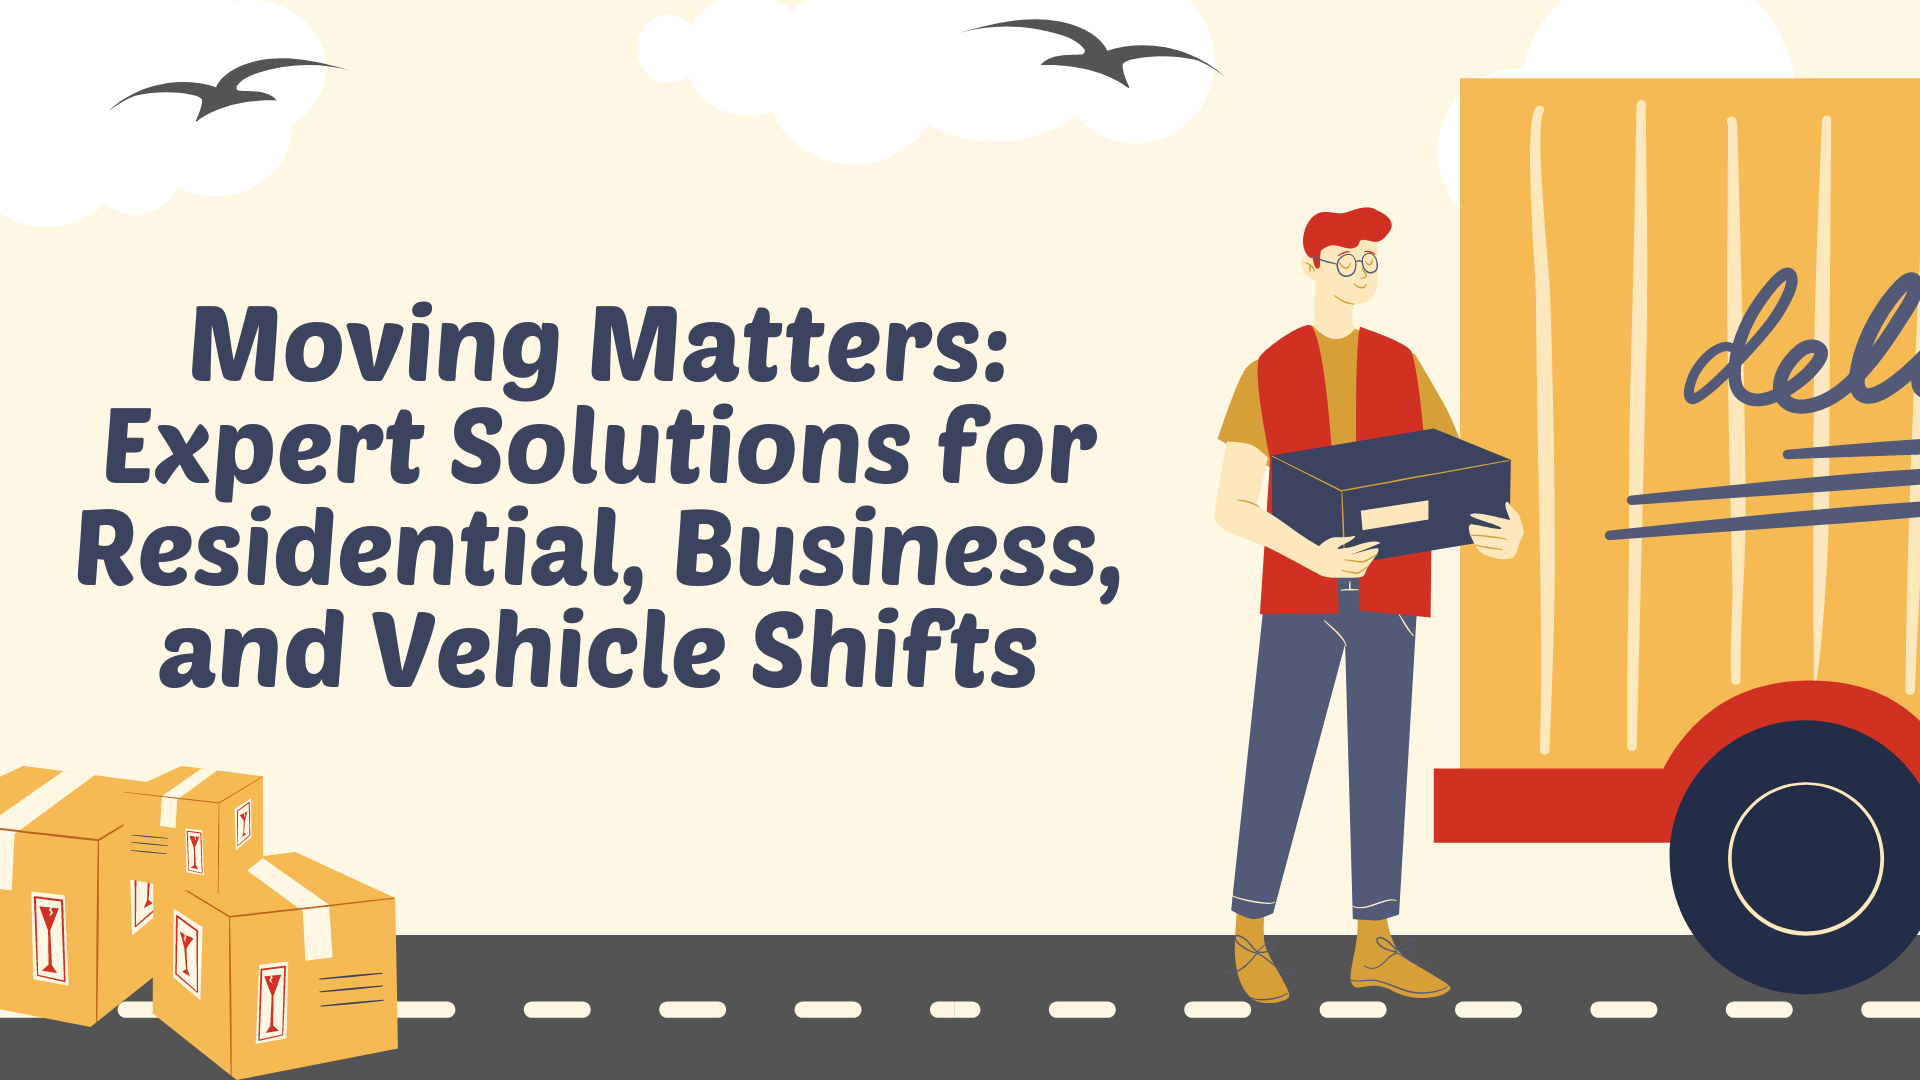 Moving Matters: Expert Solutions for Residential, Business, and Vehicle Shifts